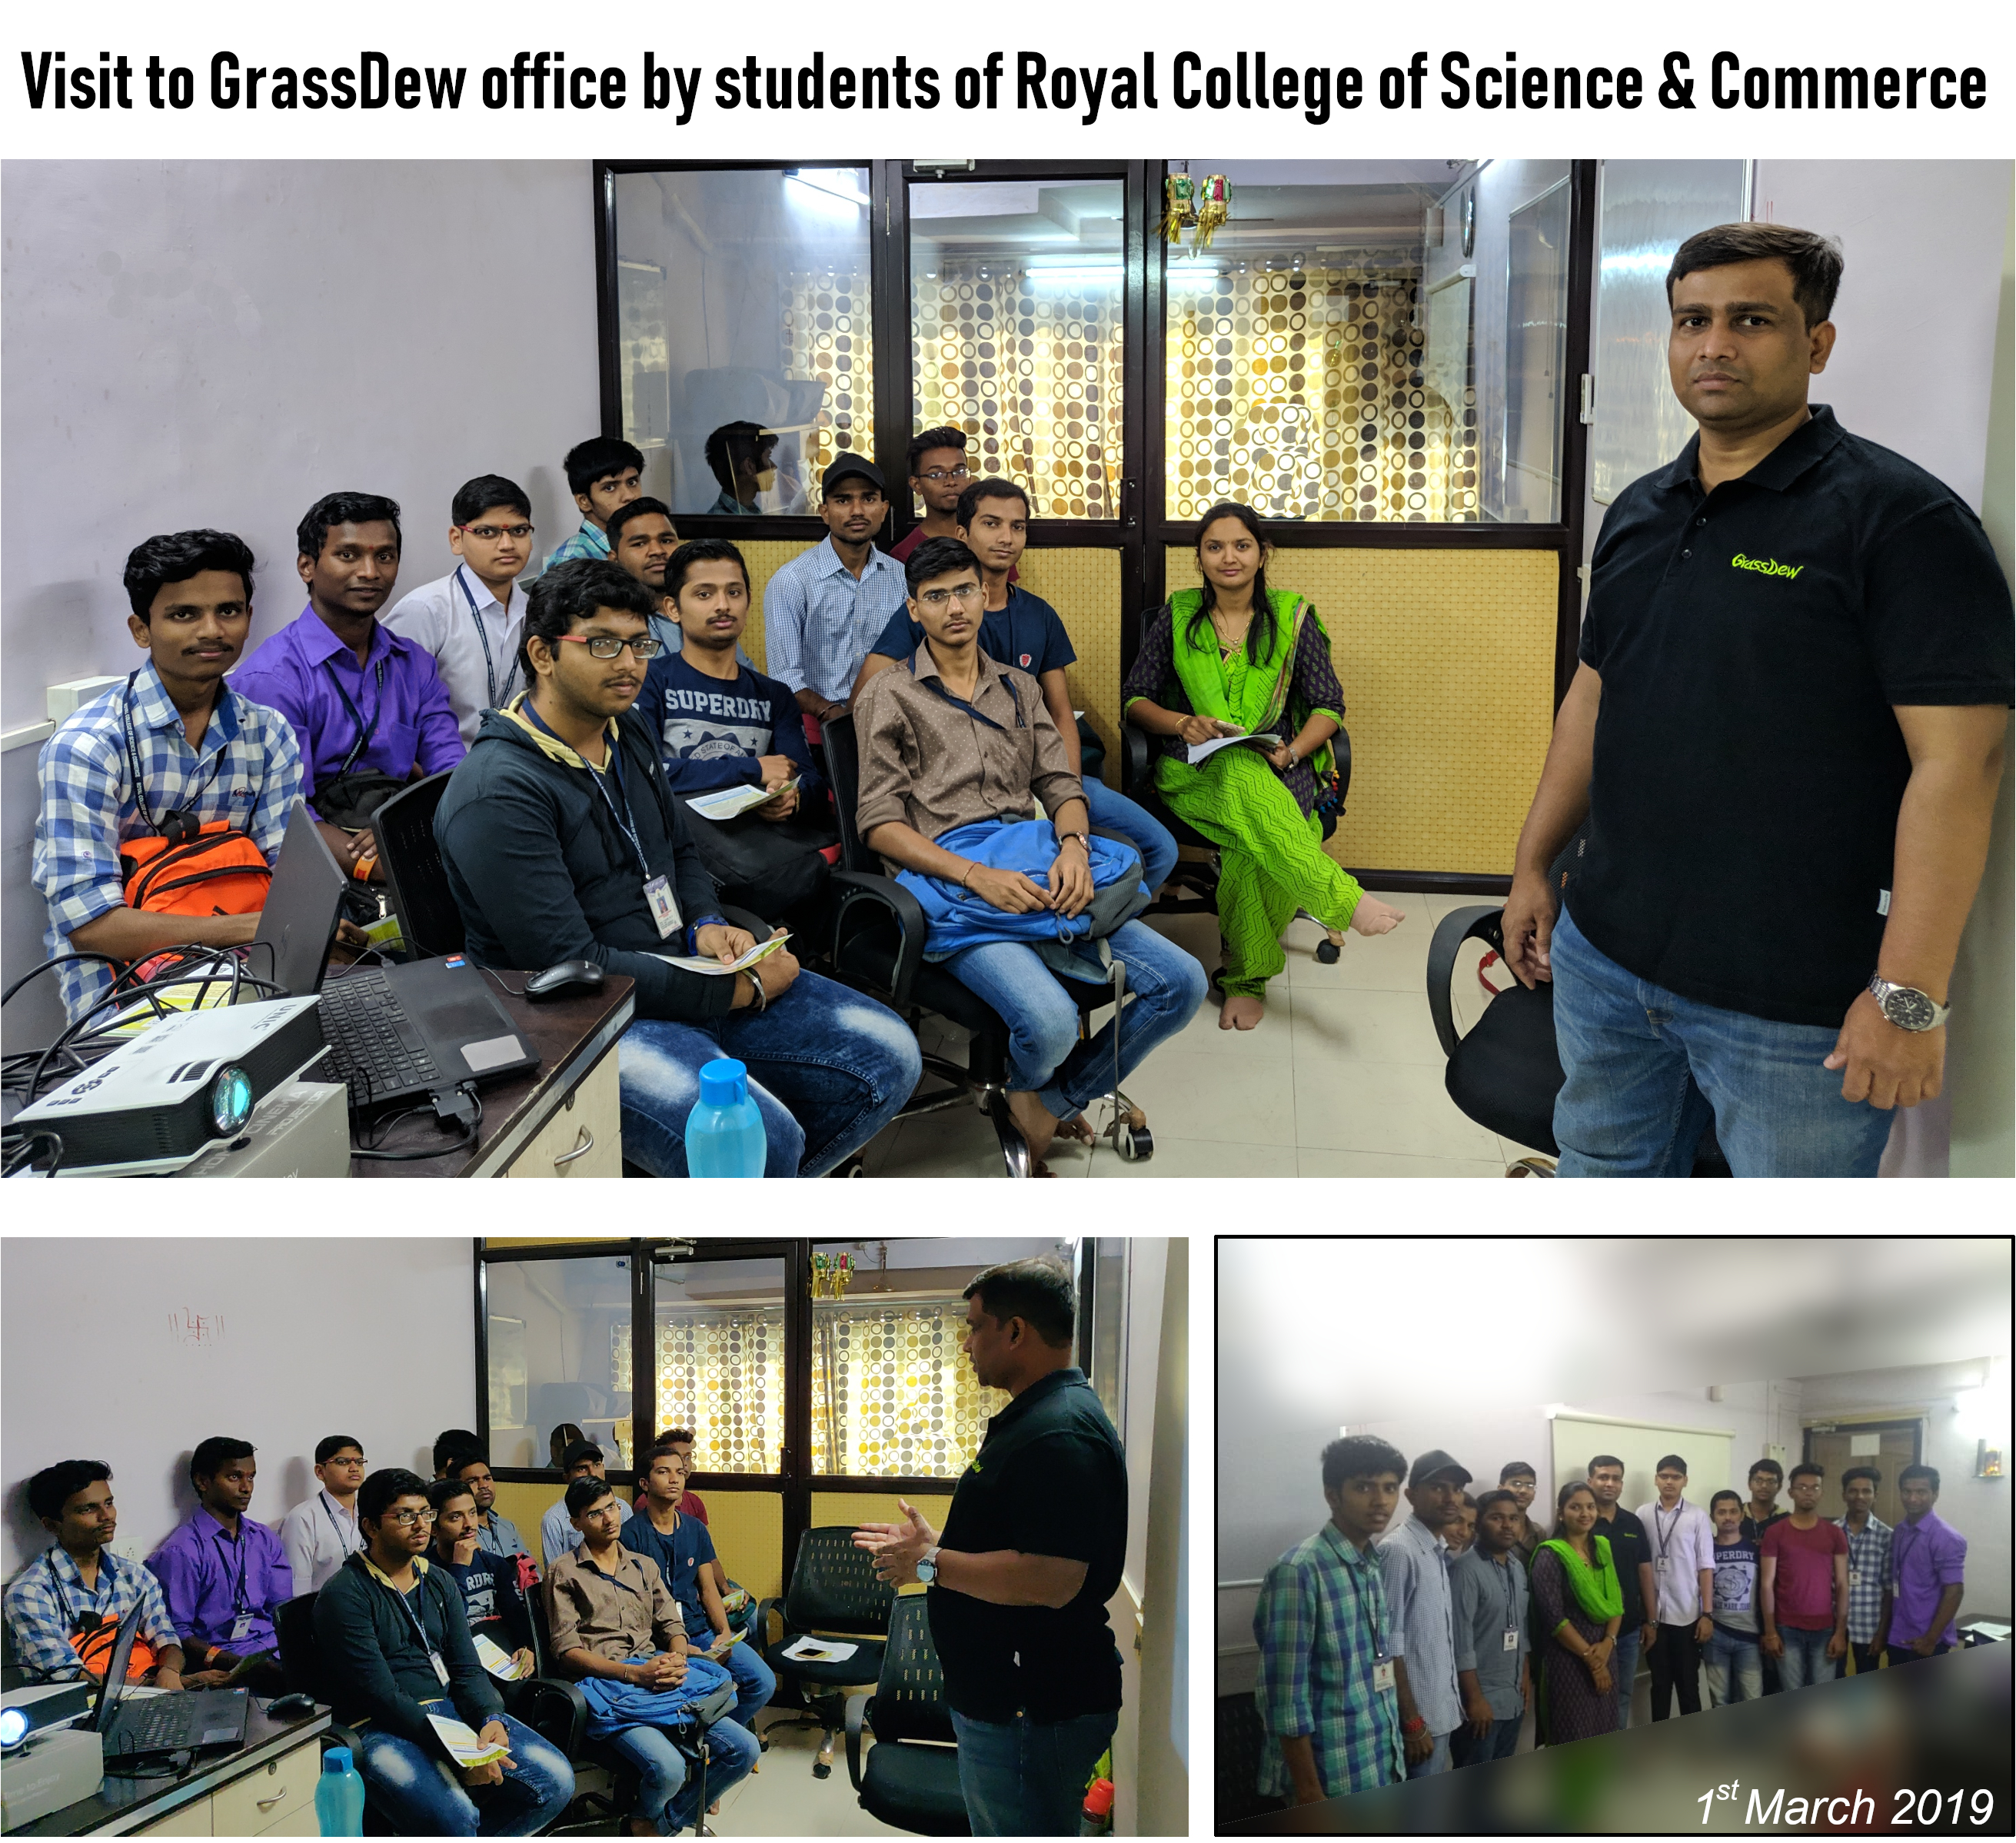 GrassDew Office Visit by students of Royal College of Science & Commerce